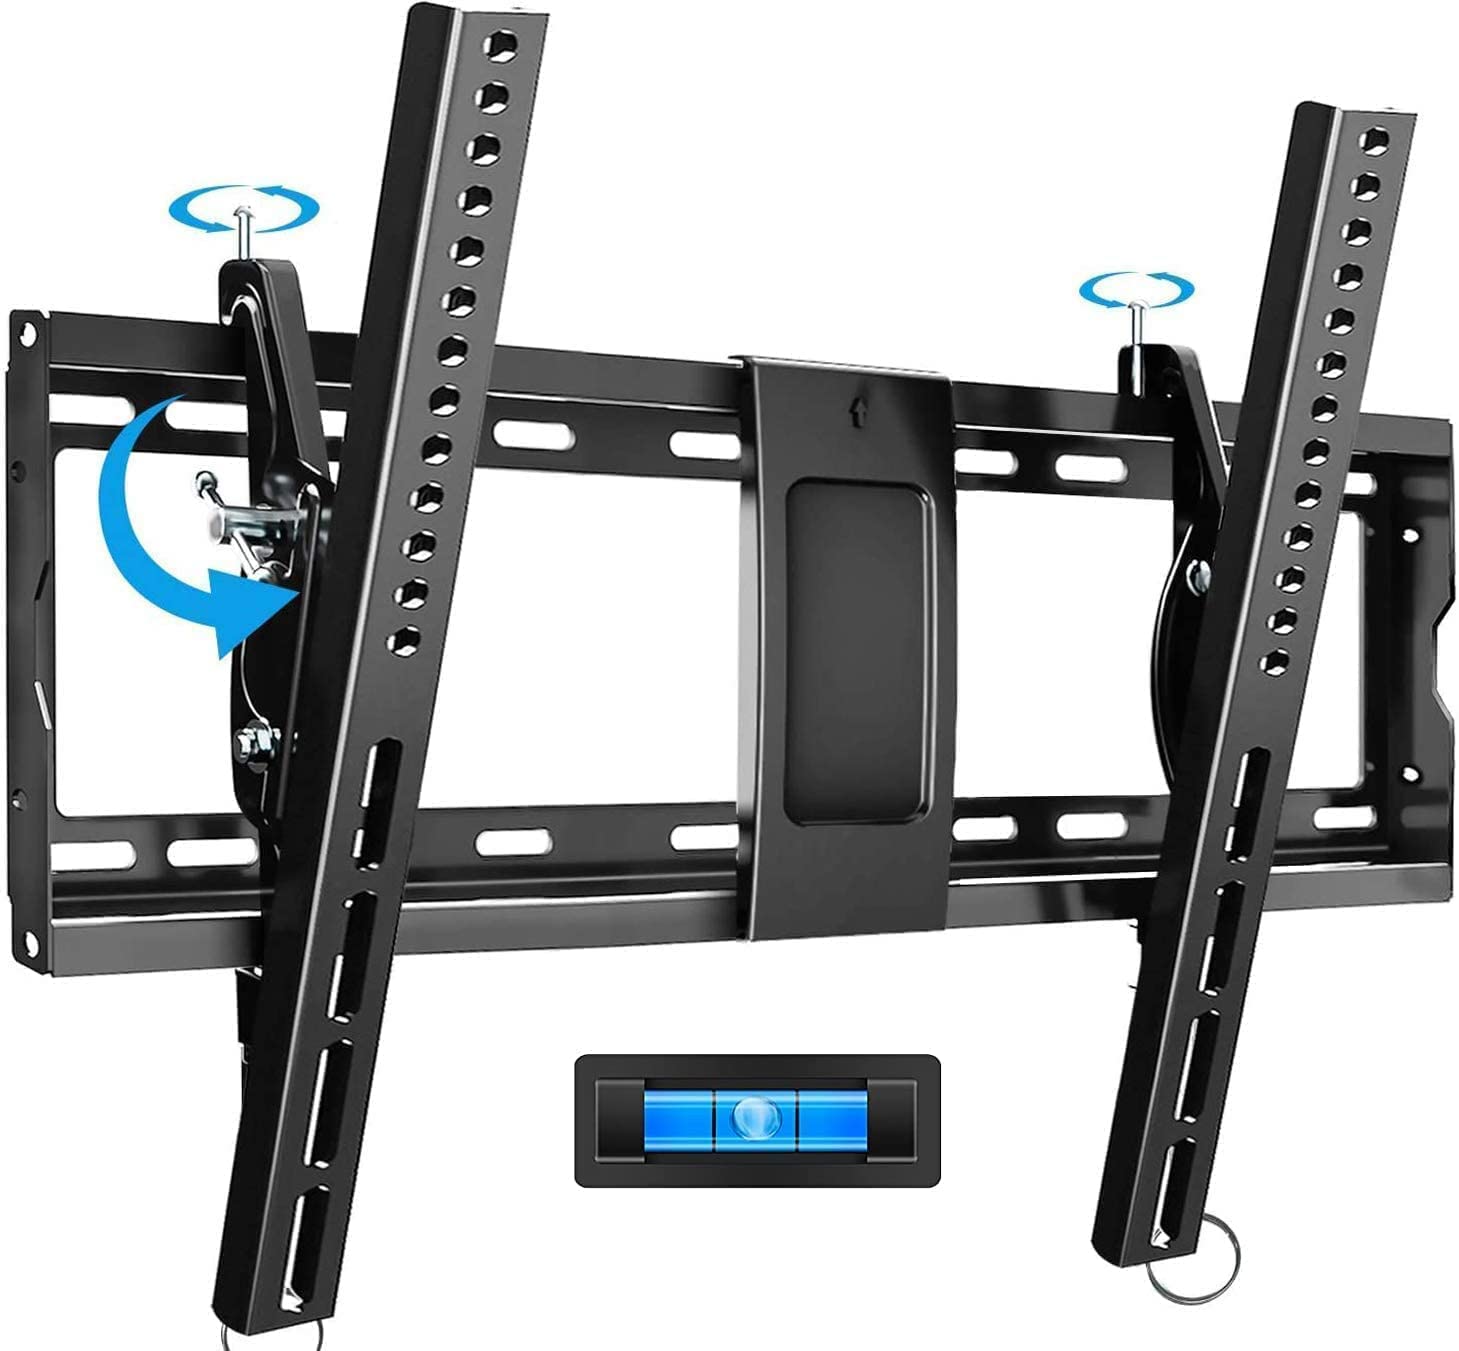 Everstone Adjustable Tilt TV Wall Mount Bracket (for 32" to 90" TVs up to 165-lbs) $14.40 + Free Shipping